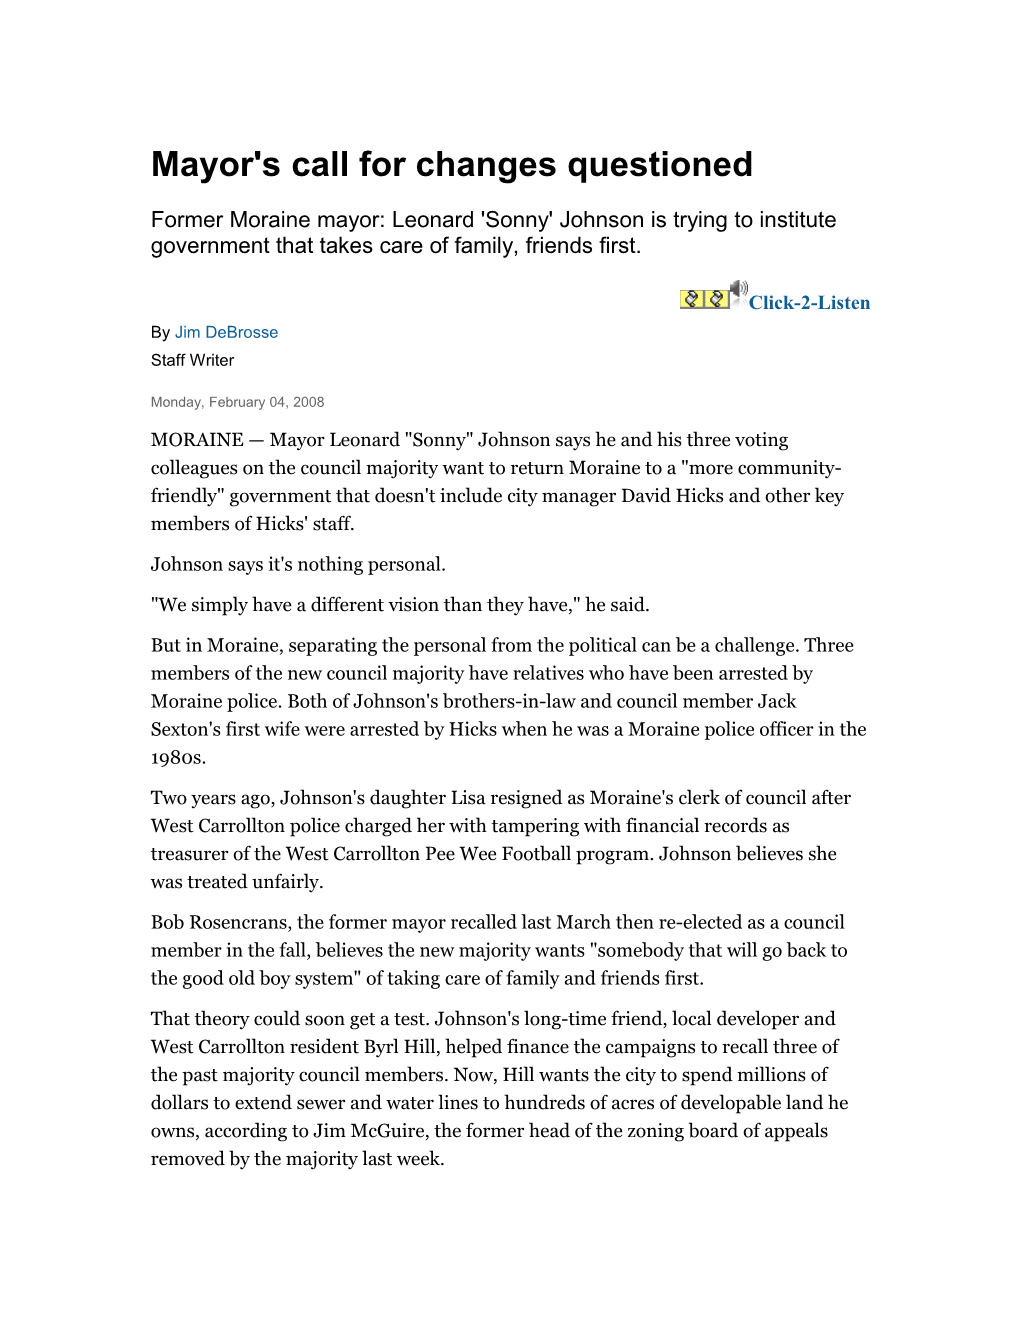 Mayor's Call for Changes Questioned